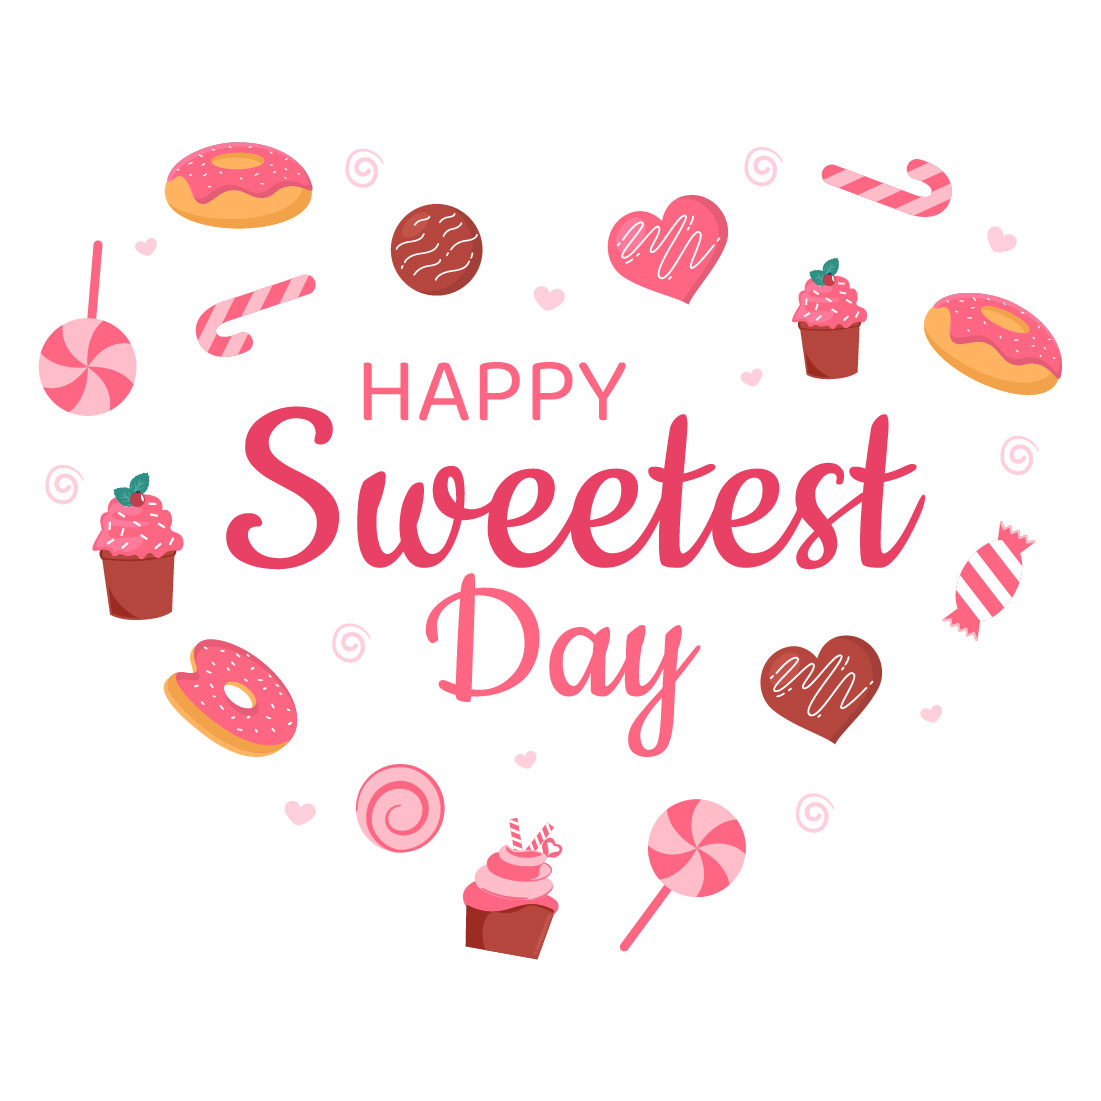 12 Happy Sweetest Day Illustration Preview Image.